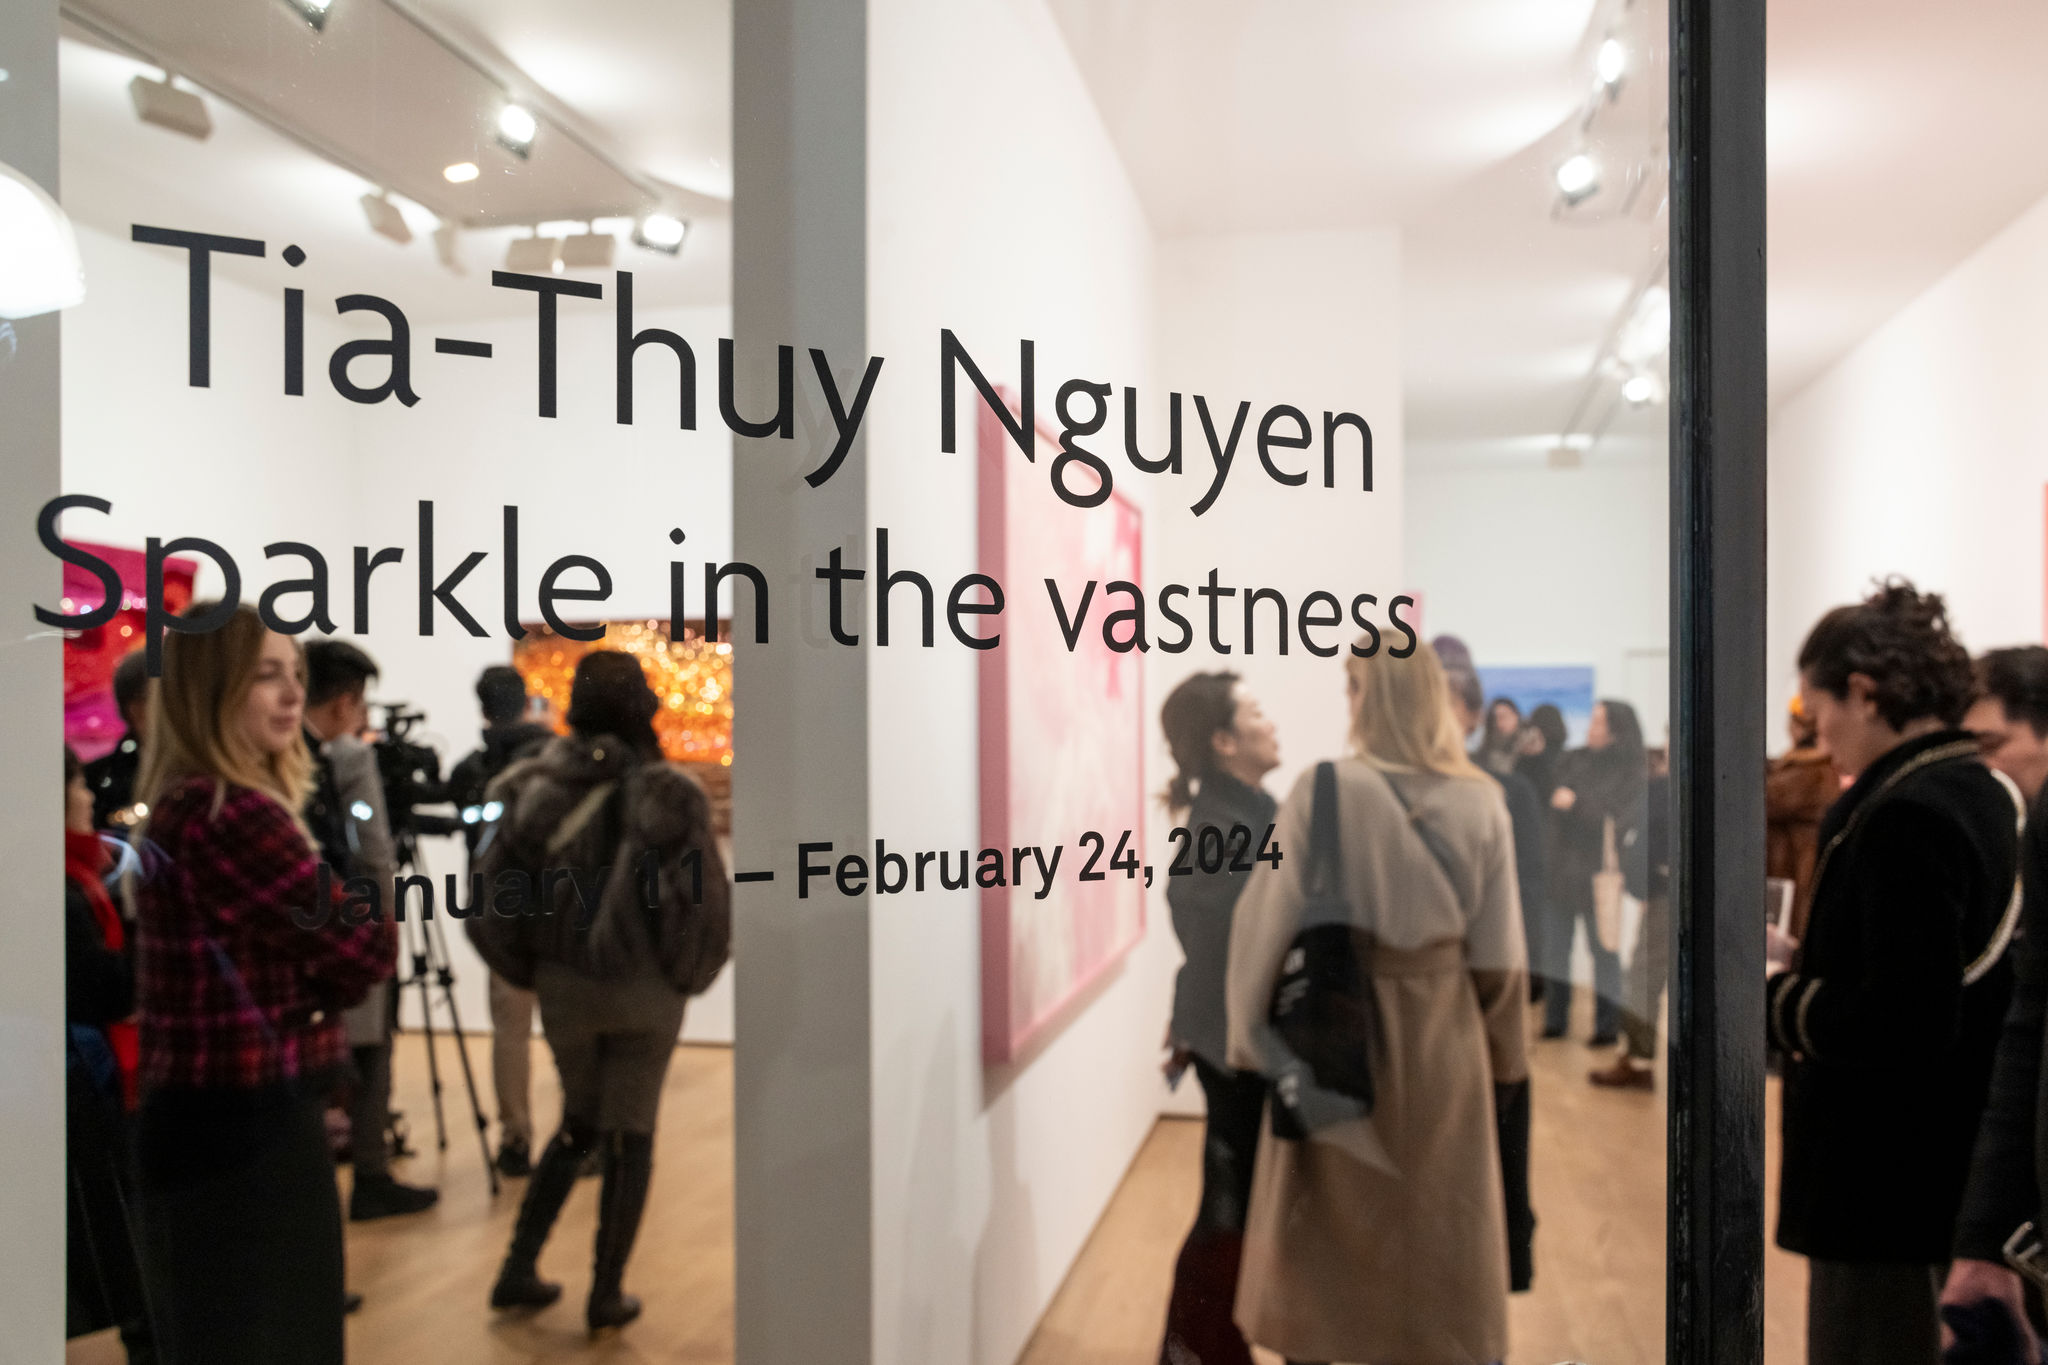 The exhibition lasts more than one month and is set to end on February 24.